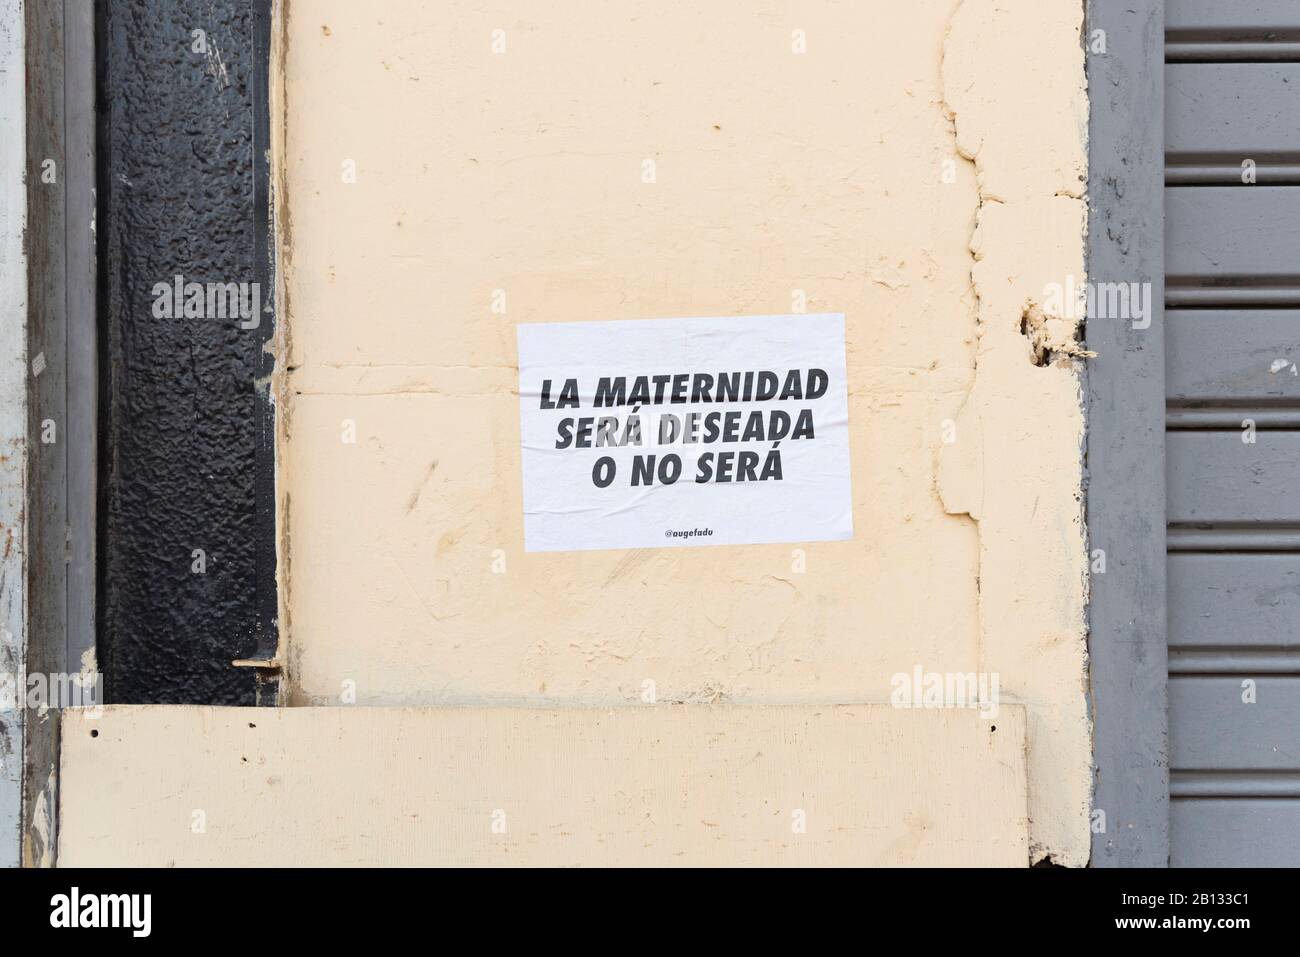 Capital Federal, Buenos Aires / Argentina; Feb 19, 2020: rally in favor of legal, safe and free abortion; poster on a wall: motherhood will be desired Stock Photo